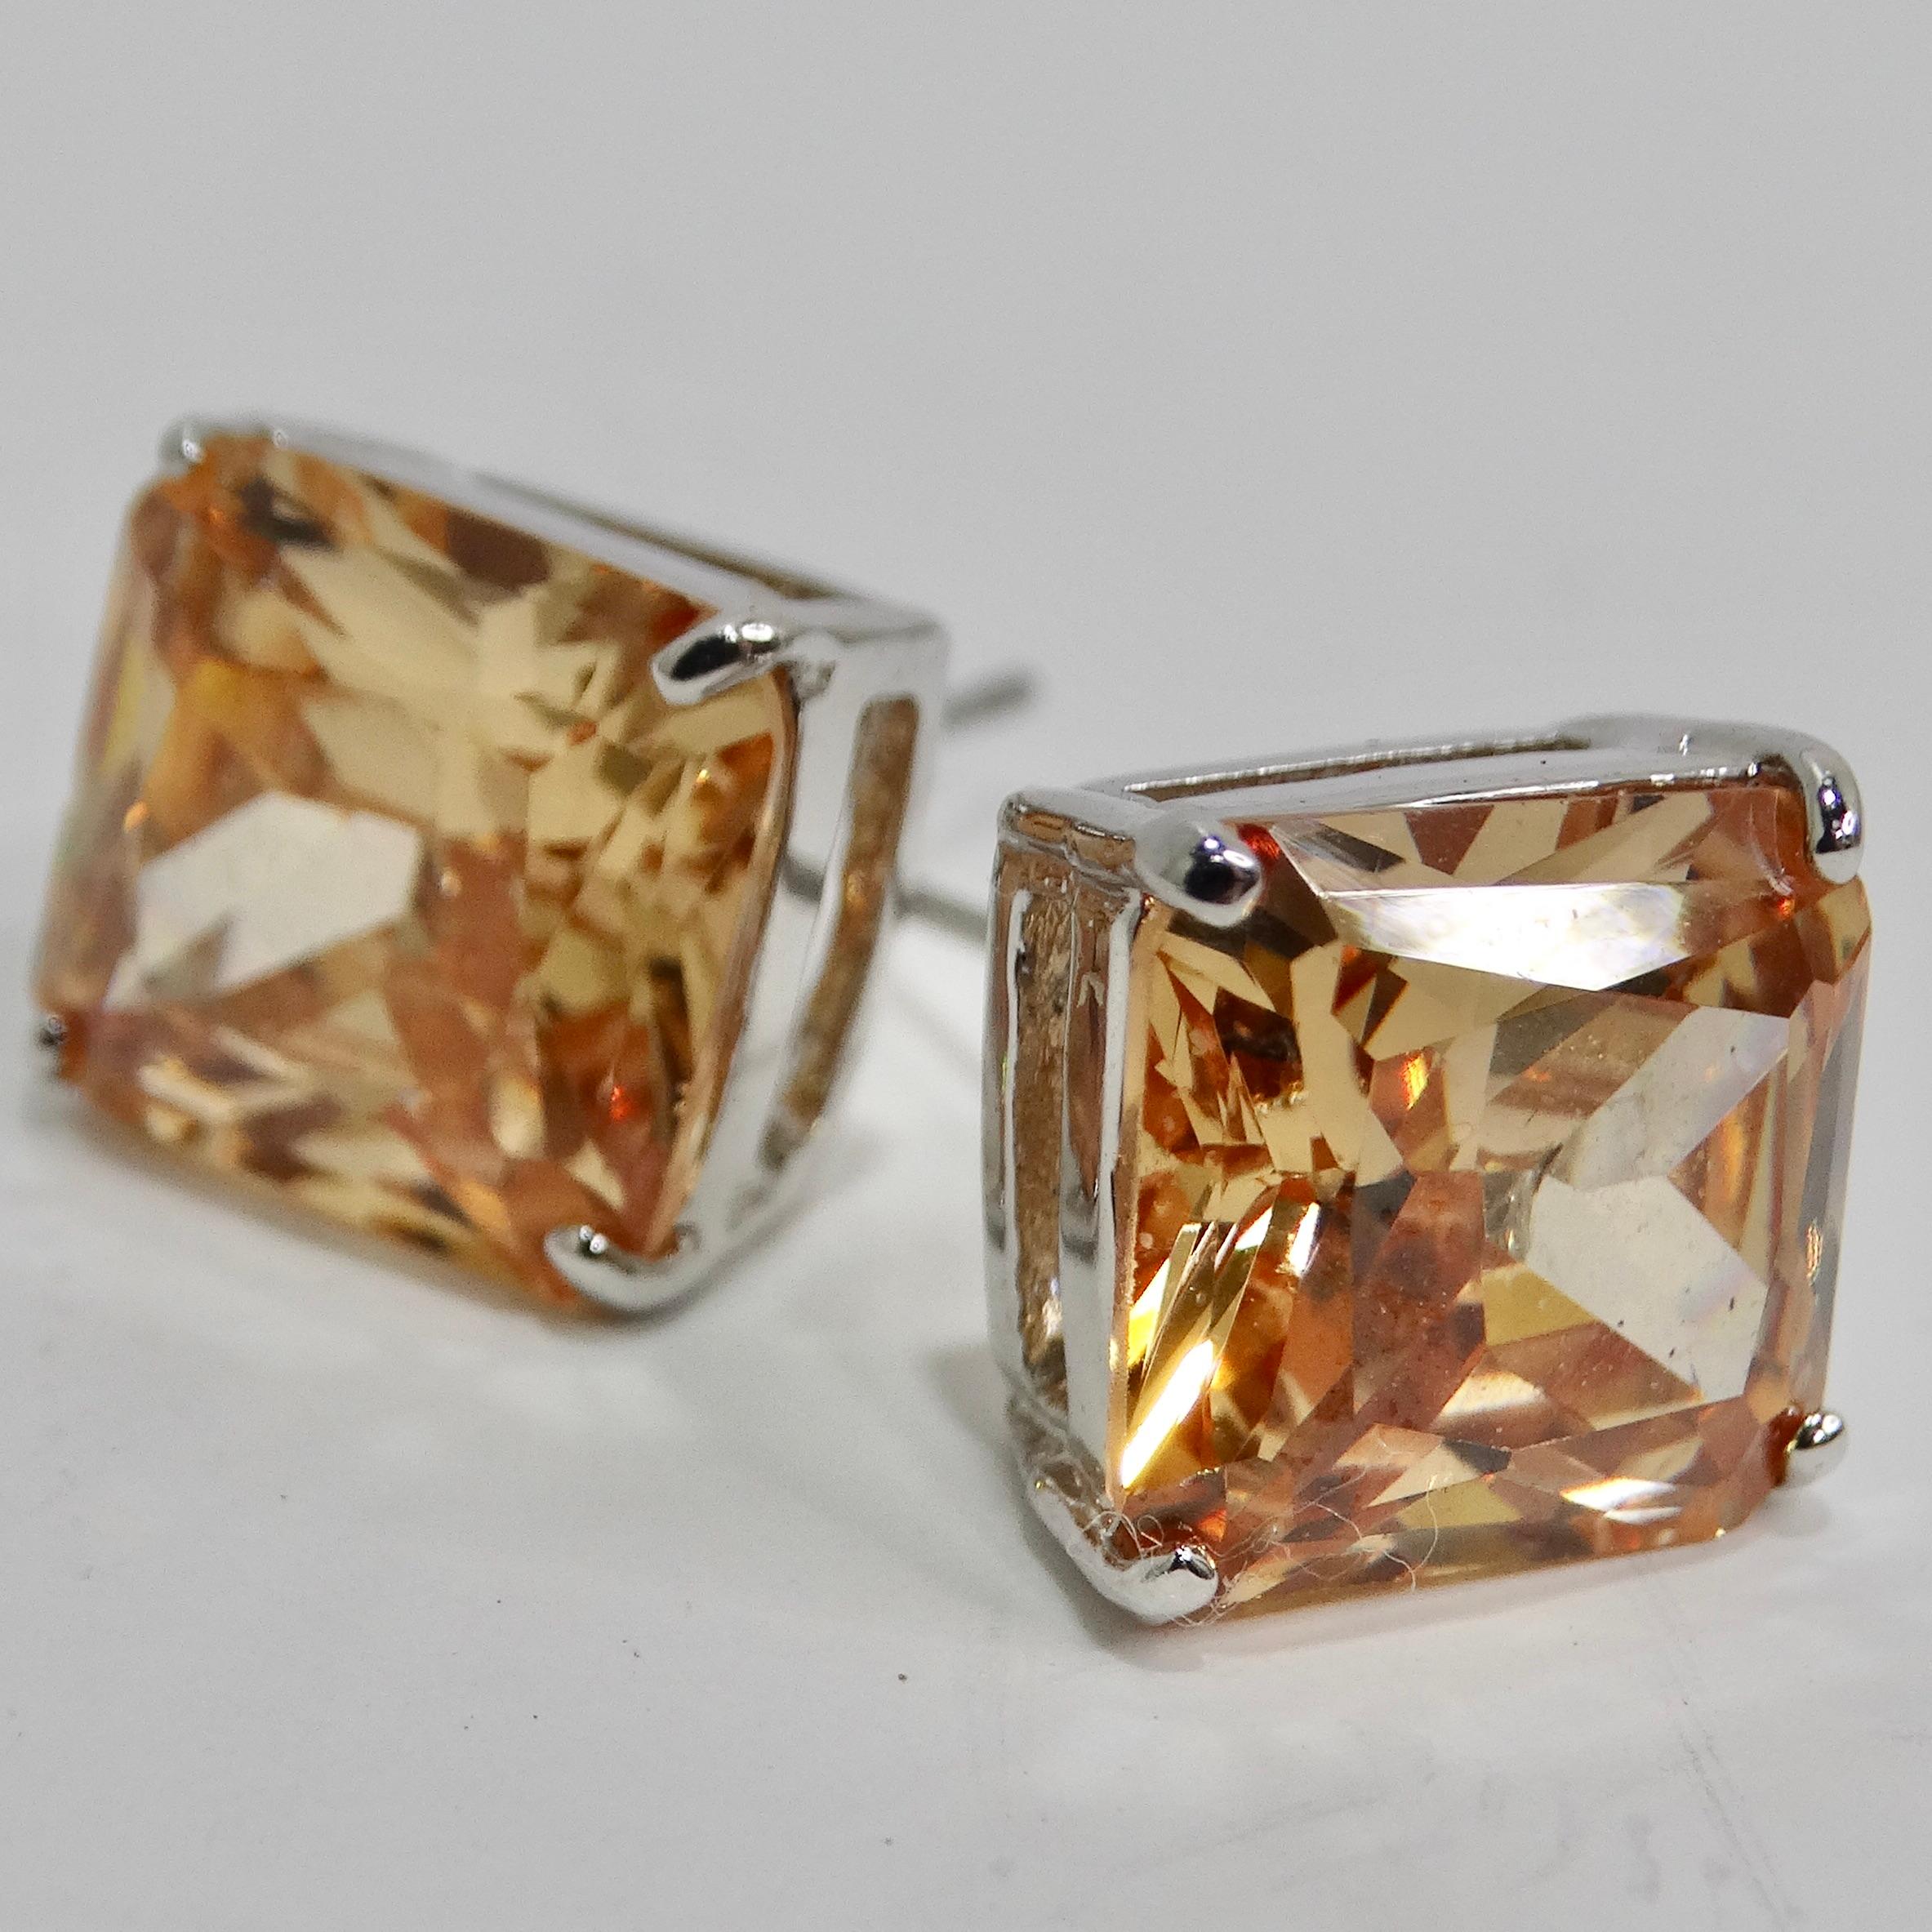 Introducing our stunning 18K Gold Plated Honey Swarovski Synthetic Crystal Stud Earrings, a classic and versatile addition to your jewelry collection. Approximately 5 carats each! These timeless stud earrings feature Swarovski emerald-cut crystals